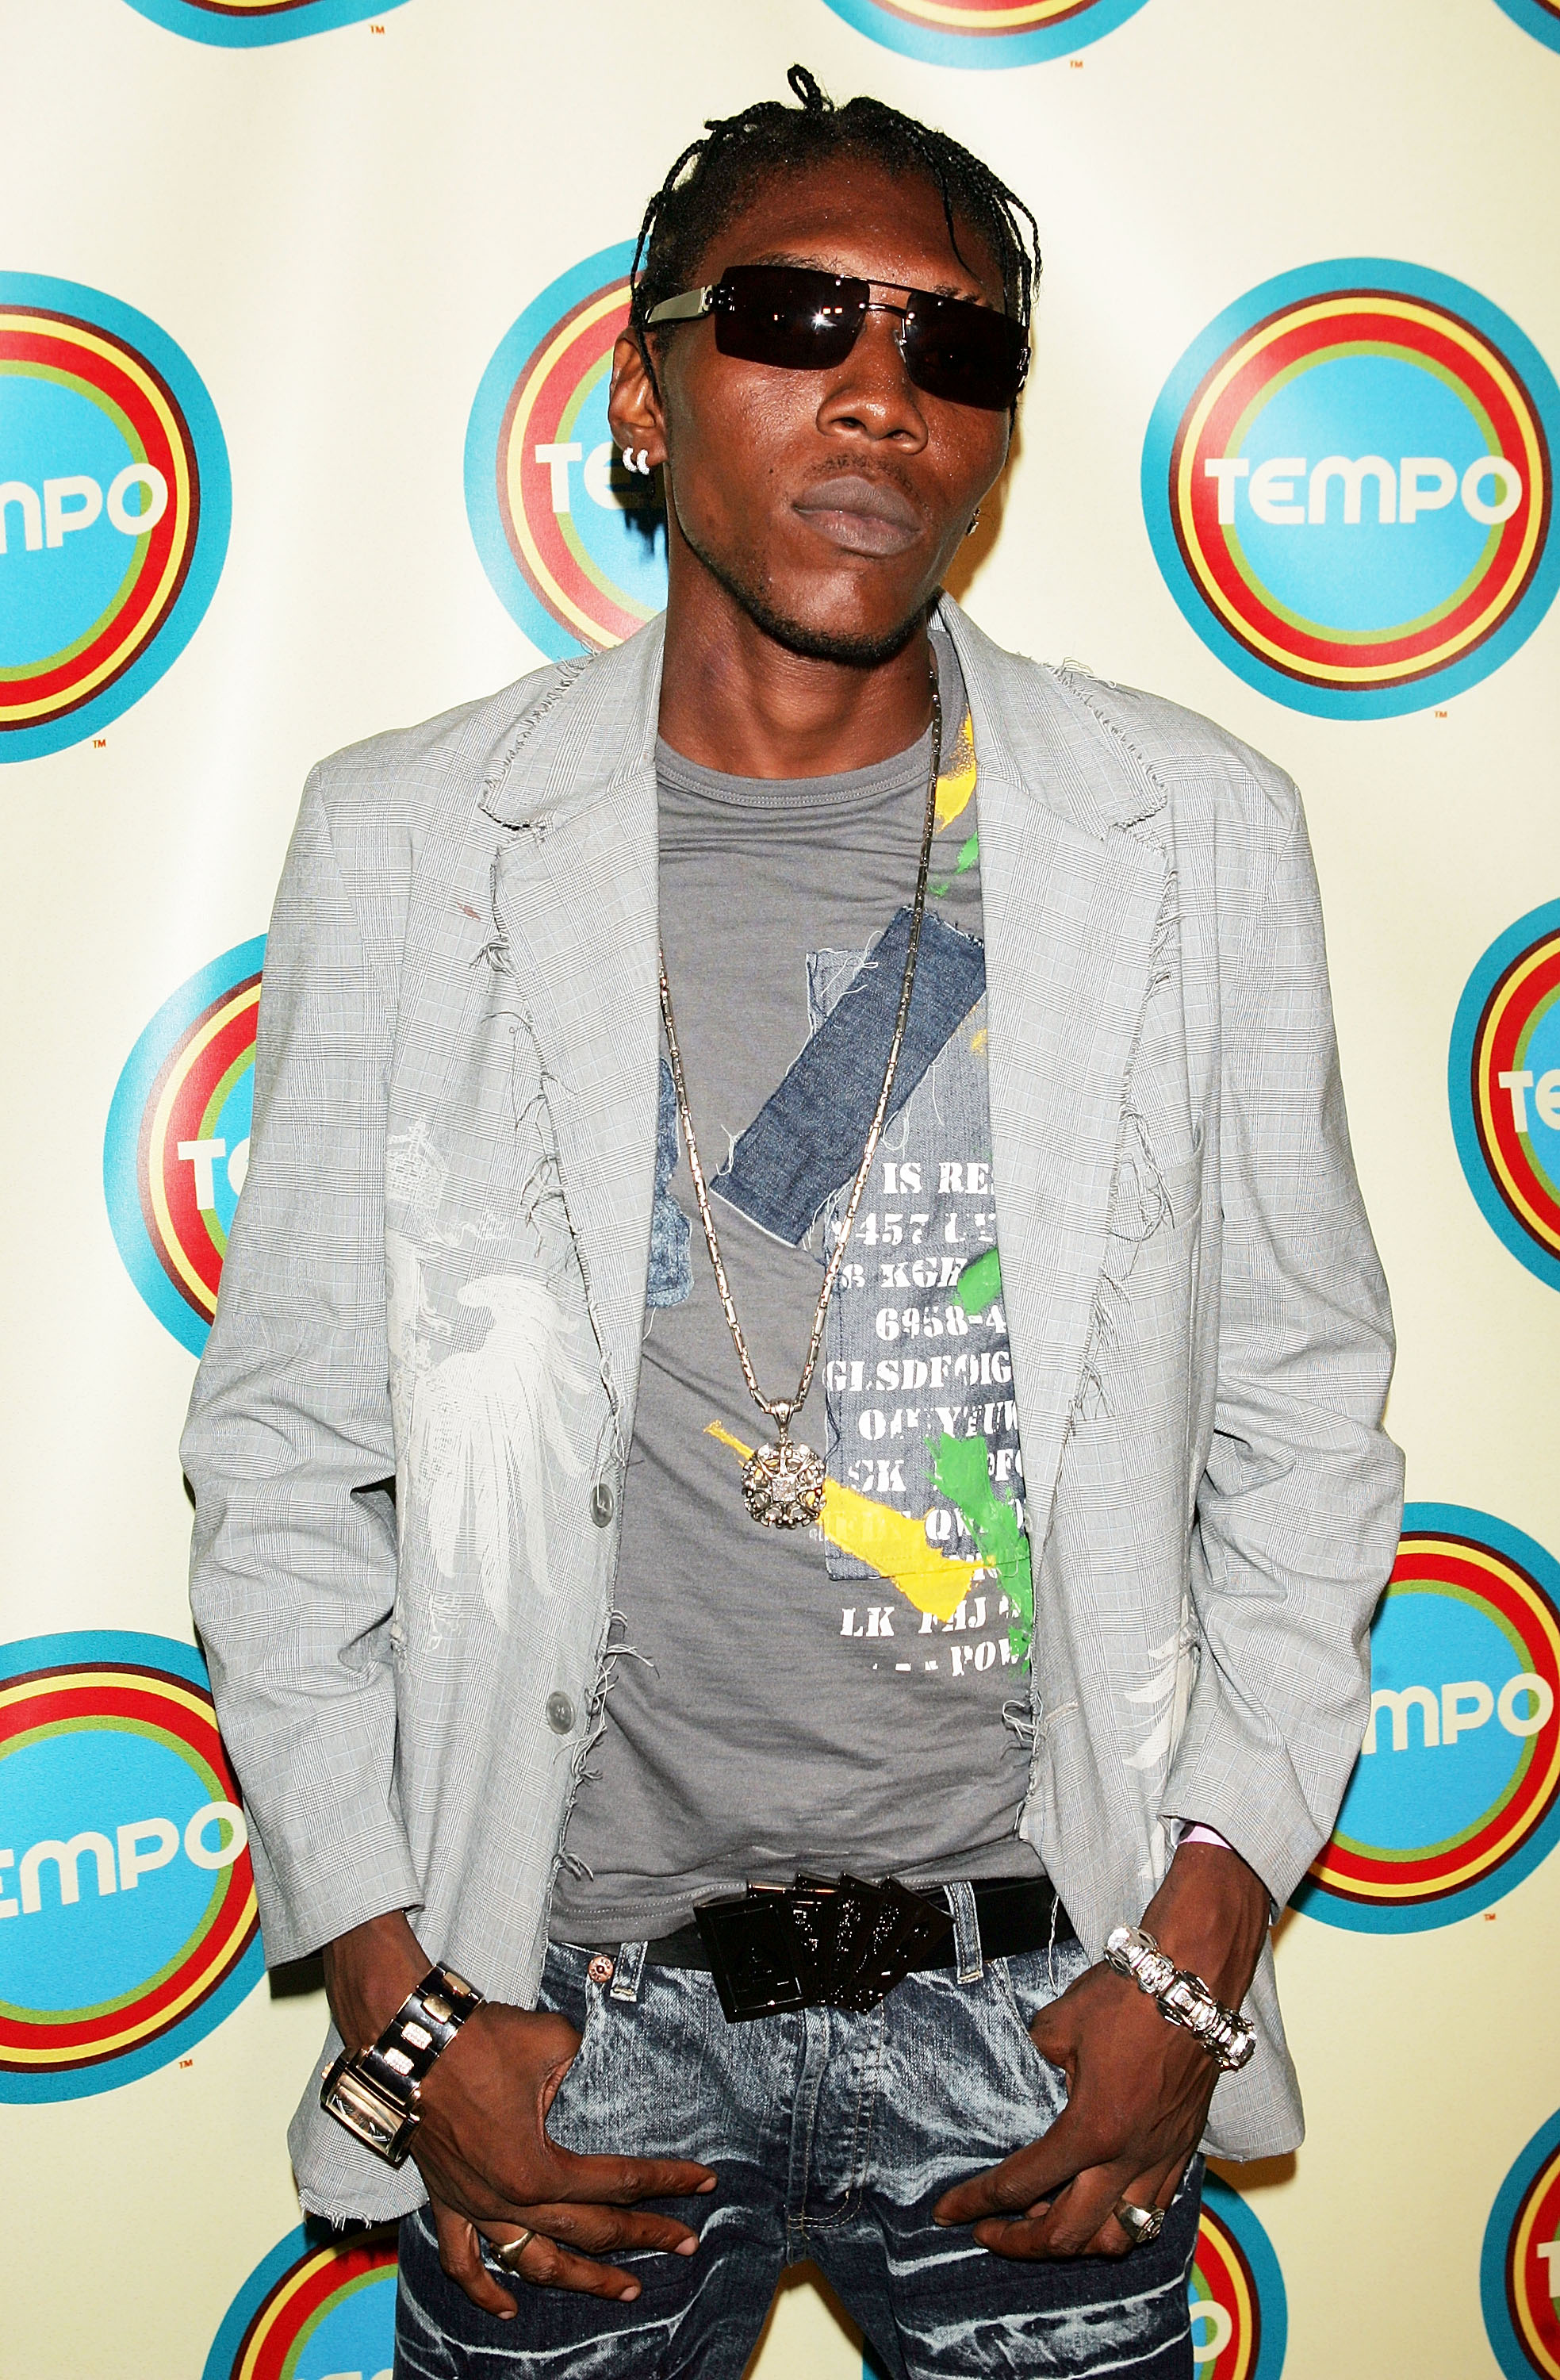 Vybz Kartel poses backstage during MTV’s Tempo network launch in 2005